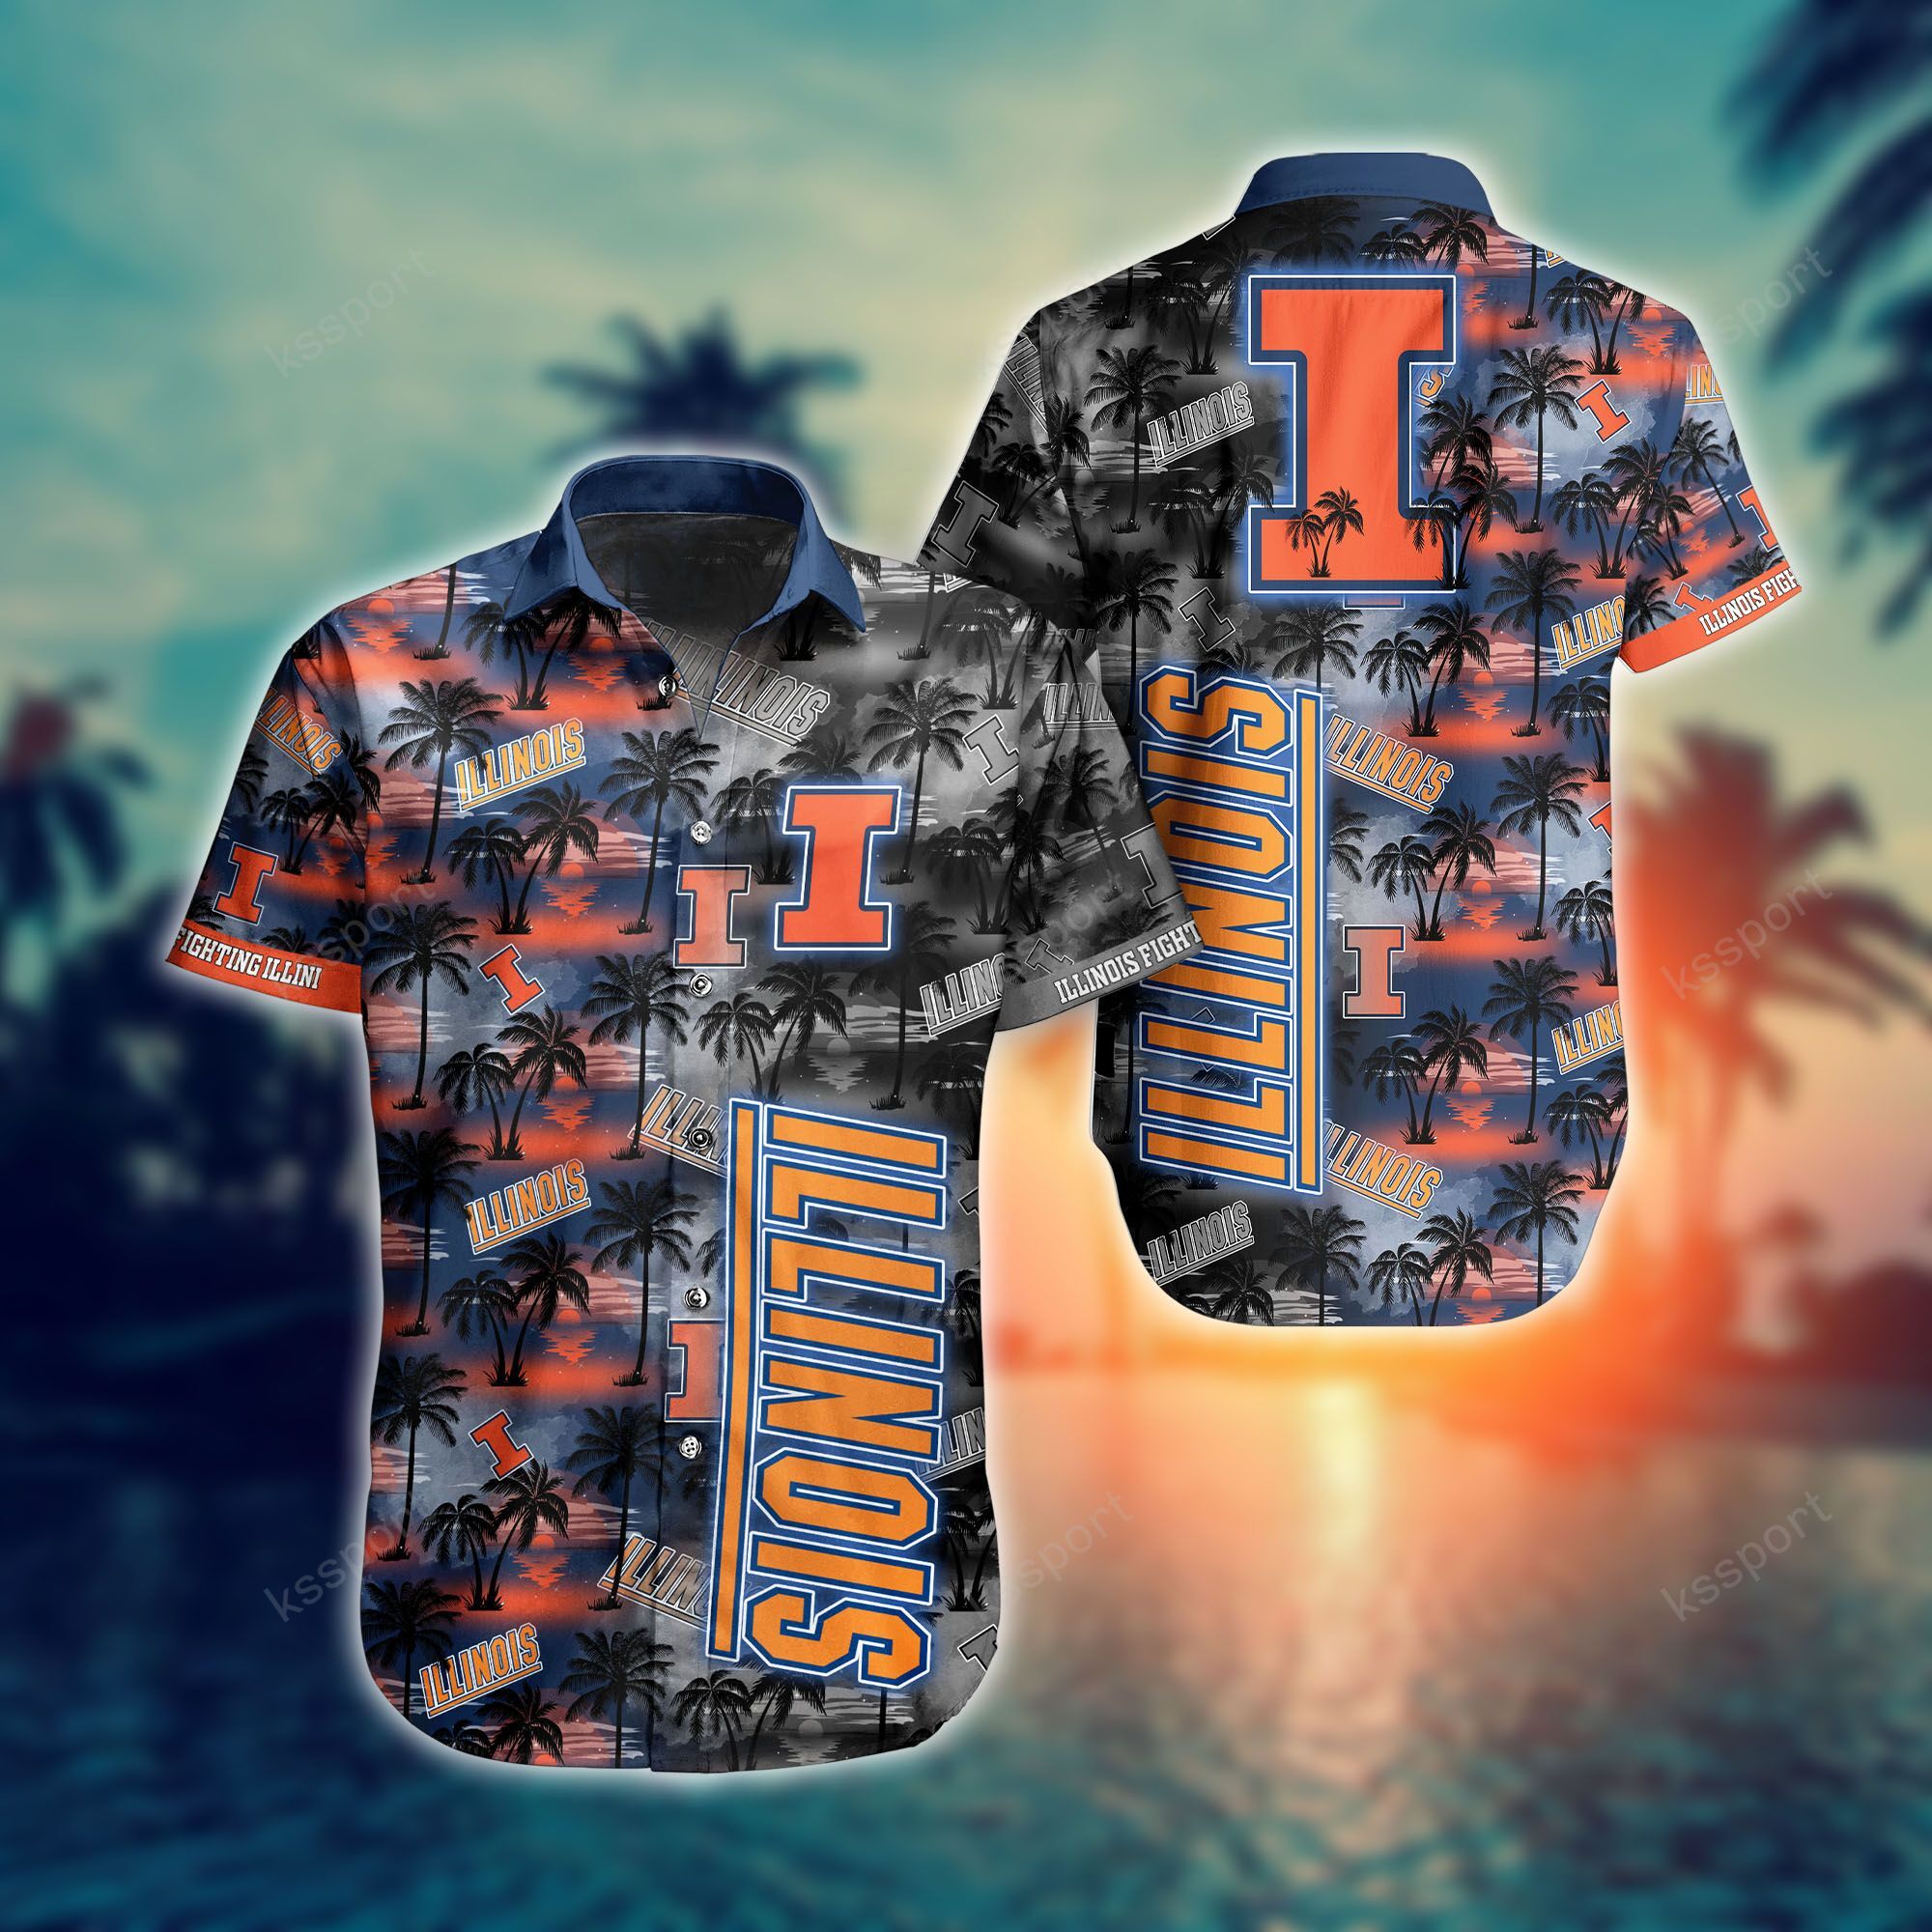 Treat yourself to a cool Hawaiian set today! 25